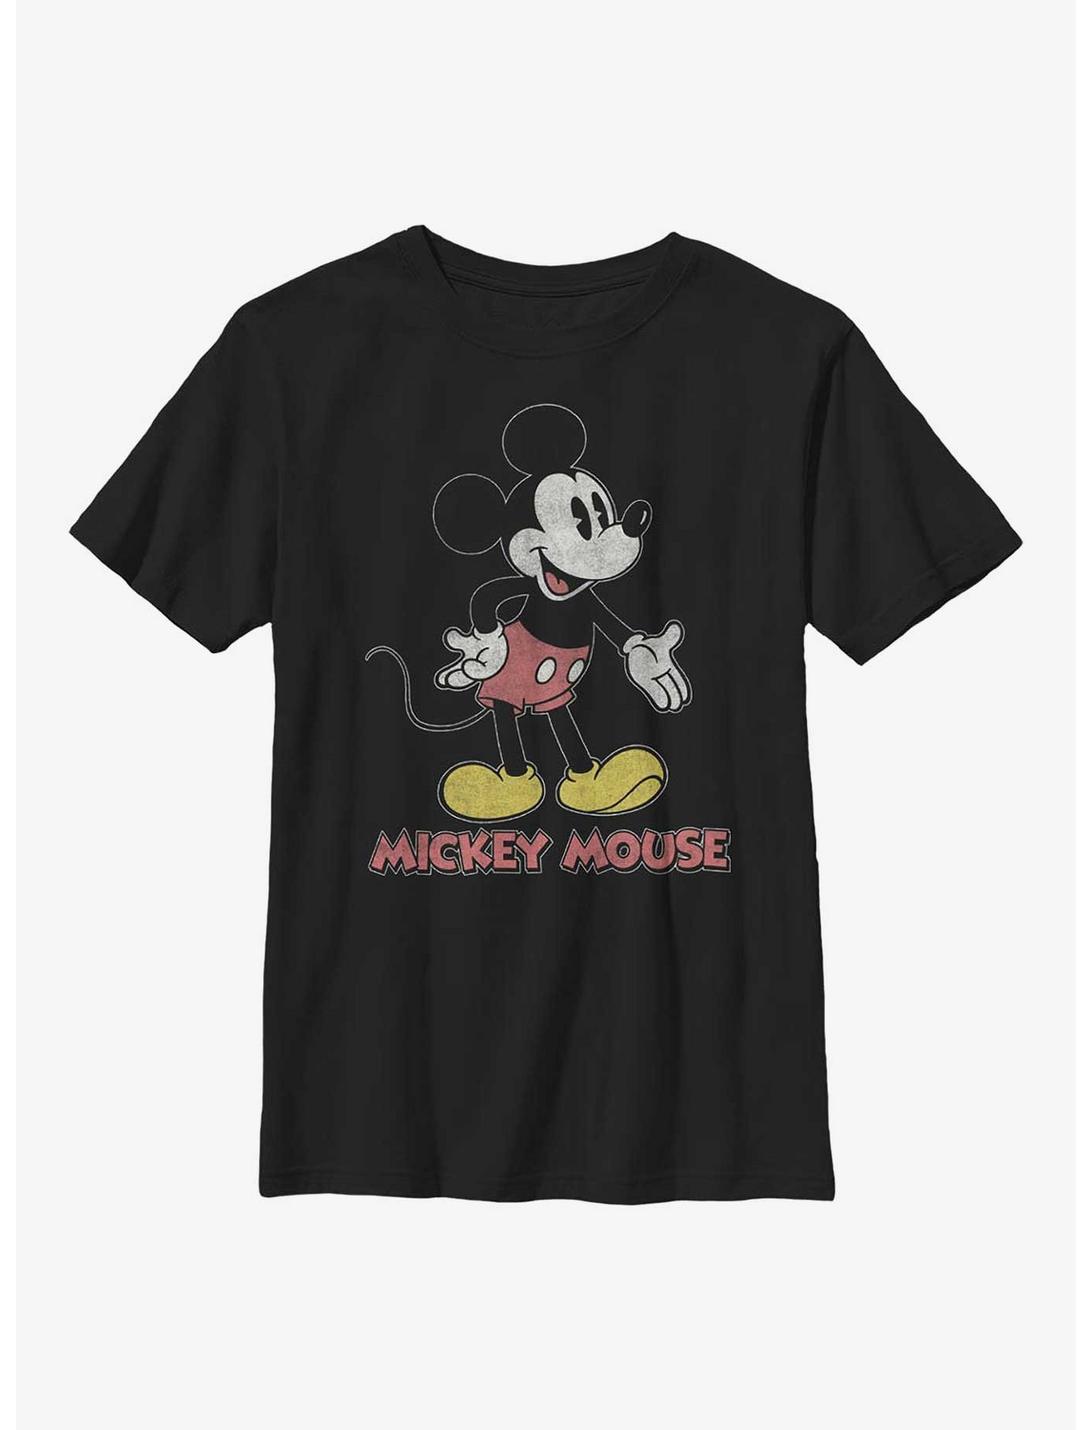 Disney Mickey Mouse Stance Youth T-Shirt, BLACK, hi-res